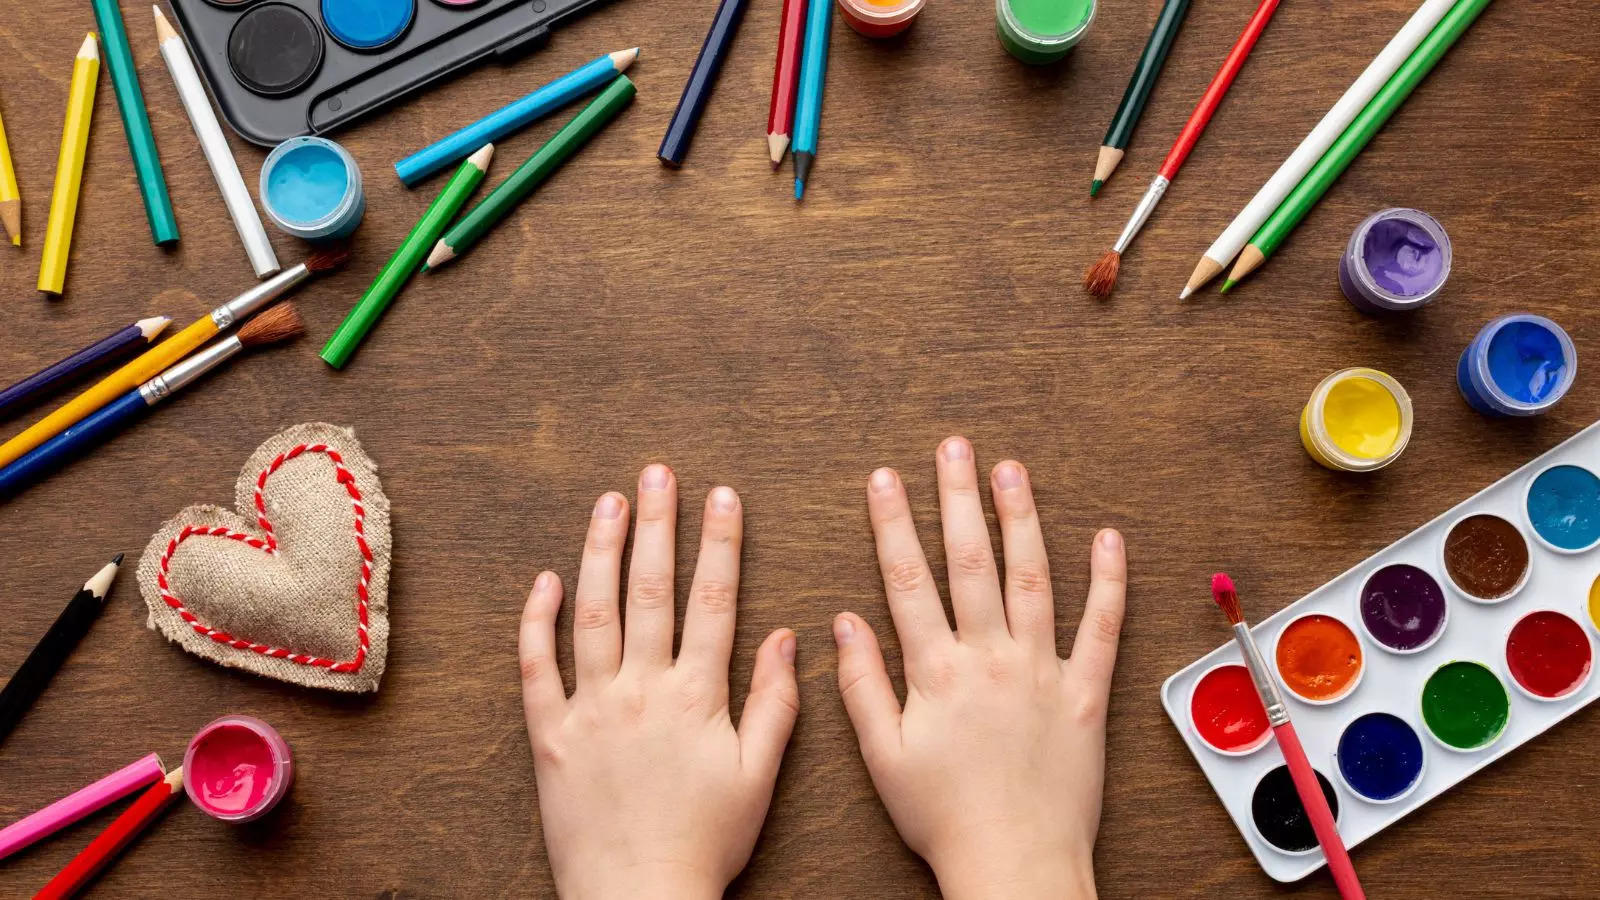 9 Best Craft Kits for Your Children to Let Their Inner Artist Shine